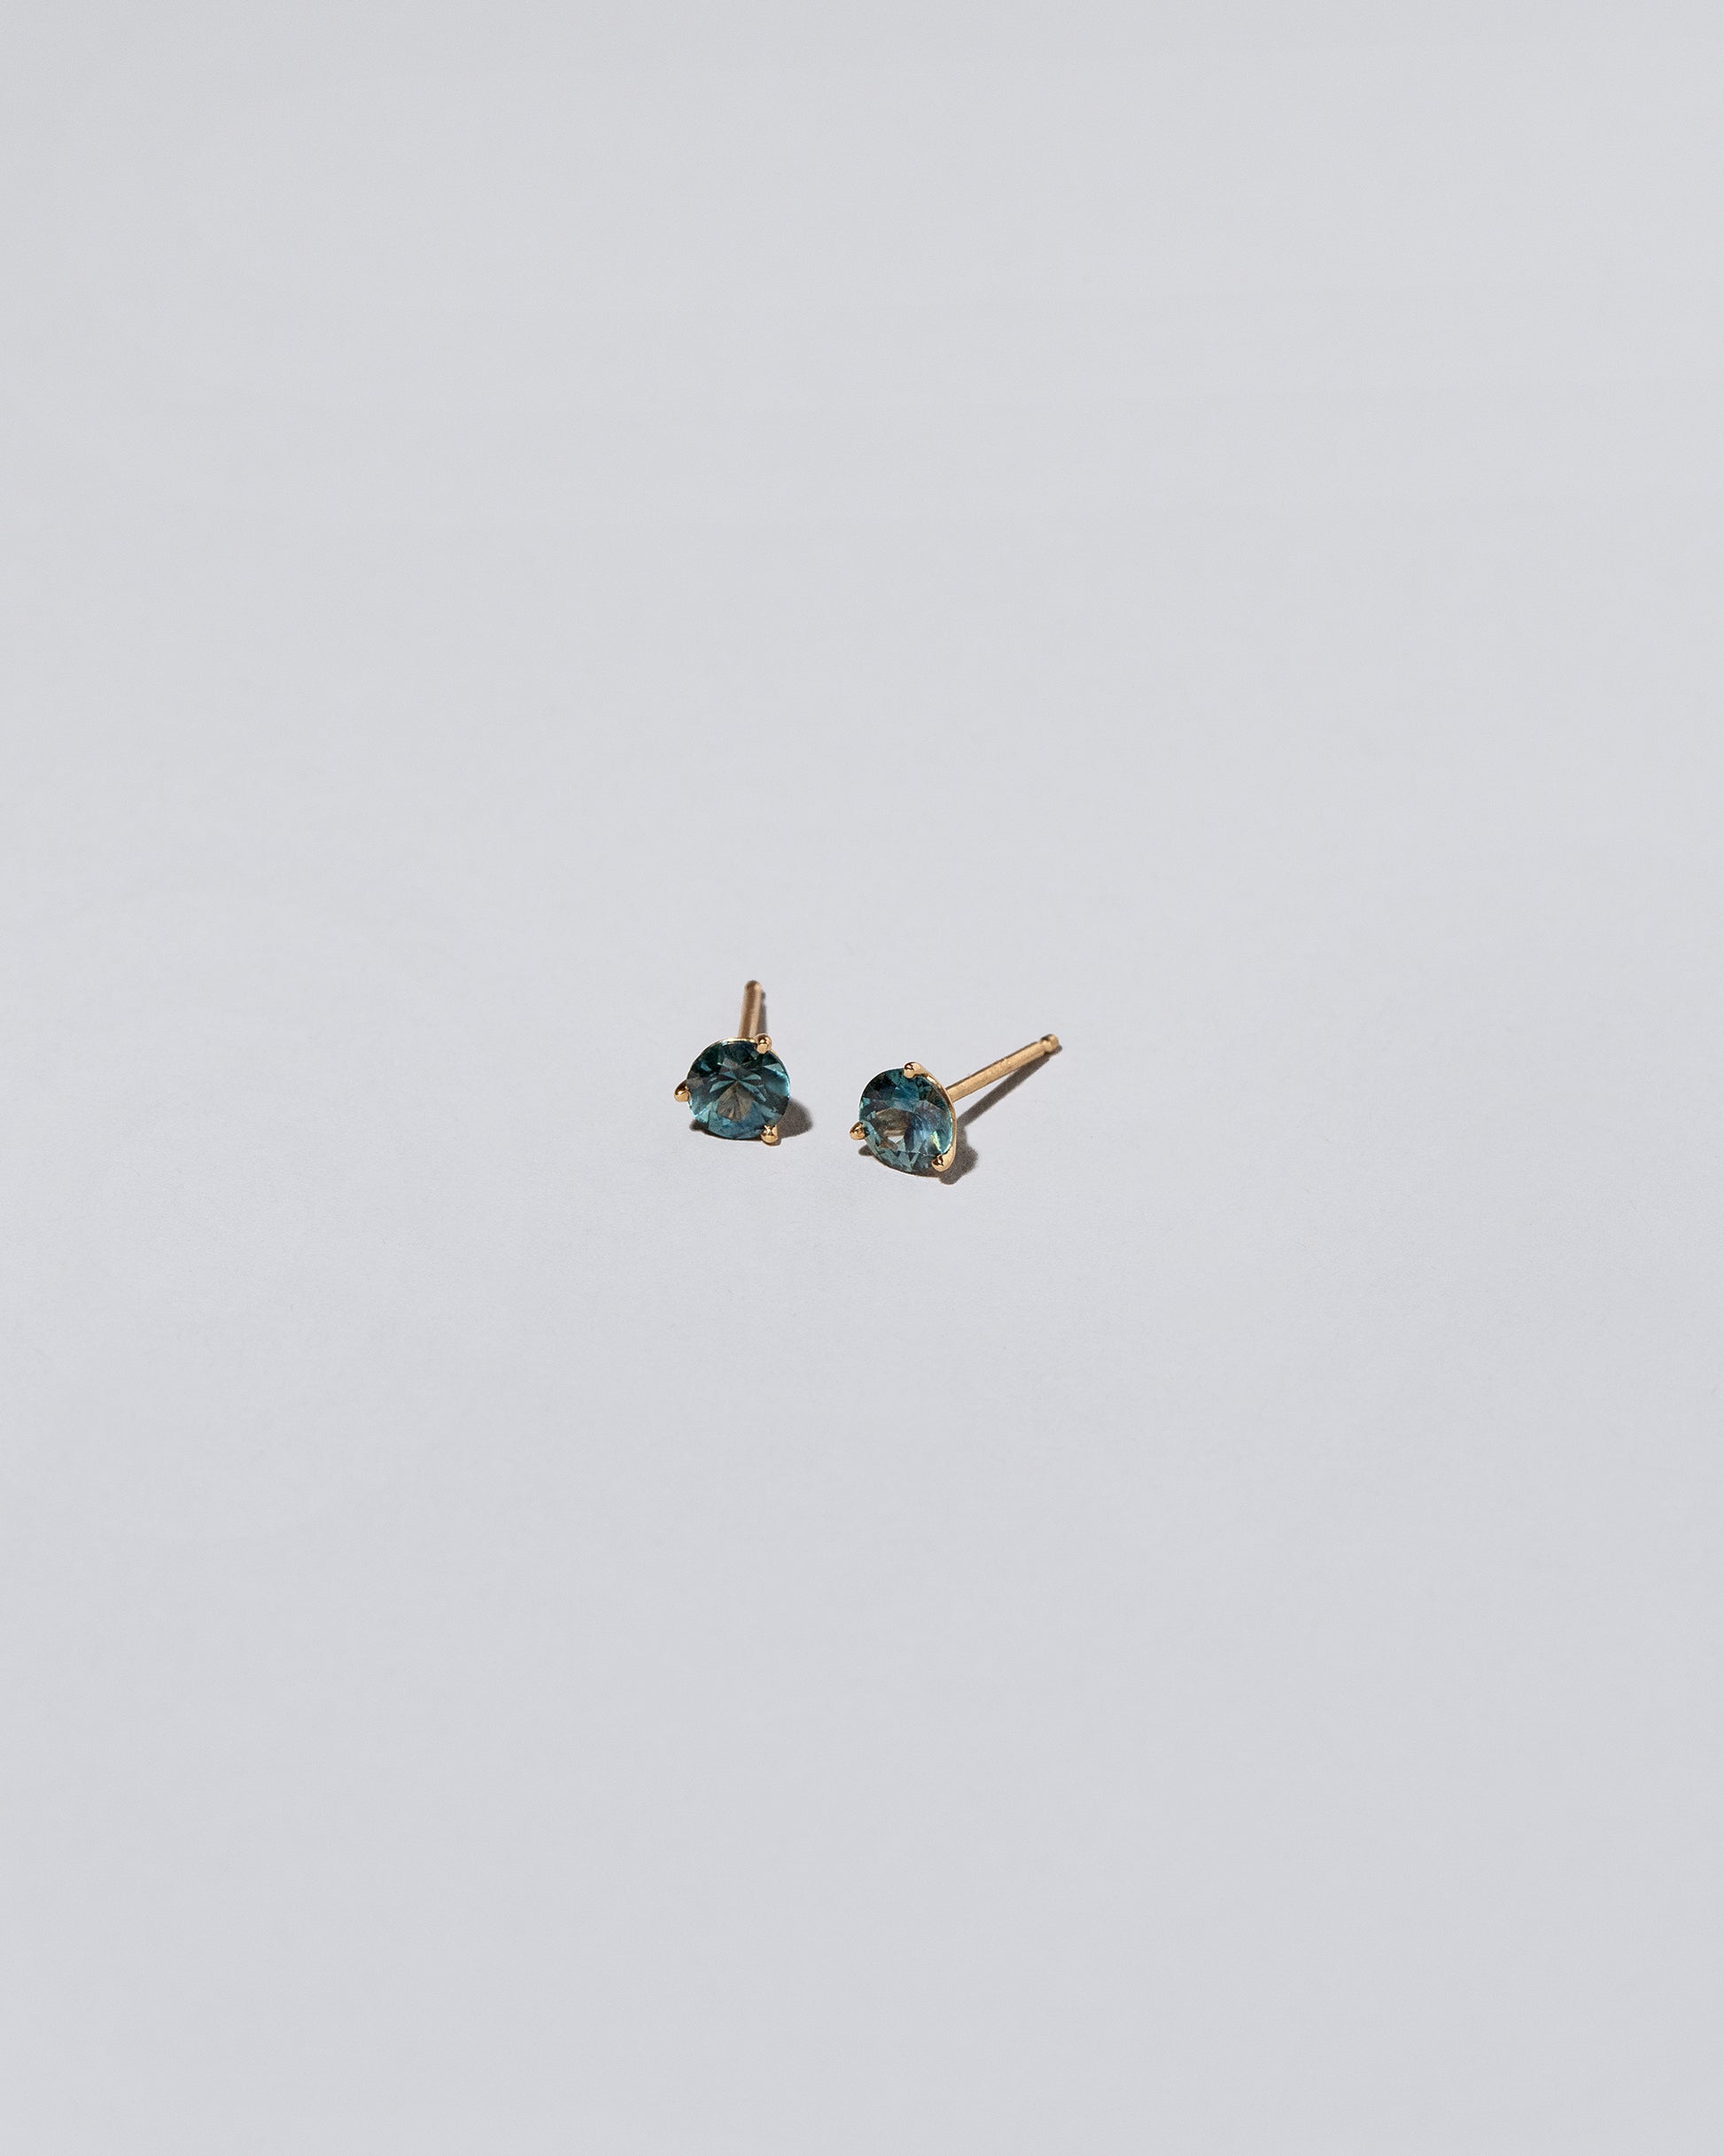 Teal Bicolor Sapphire Martini Stud Earrings on light color background.